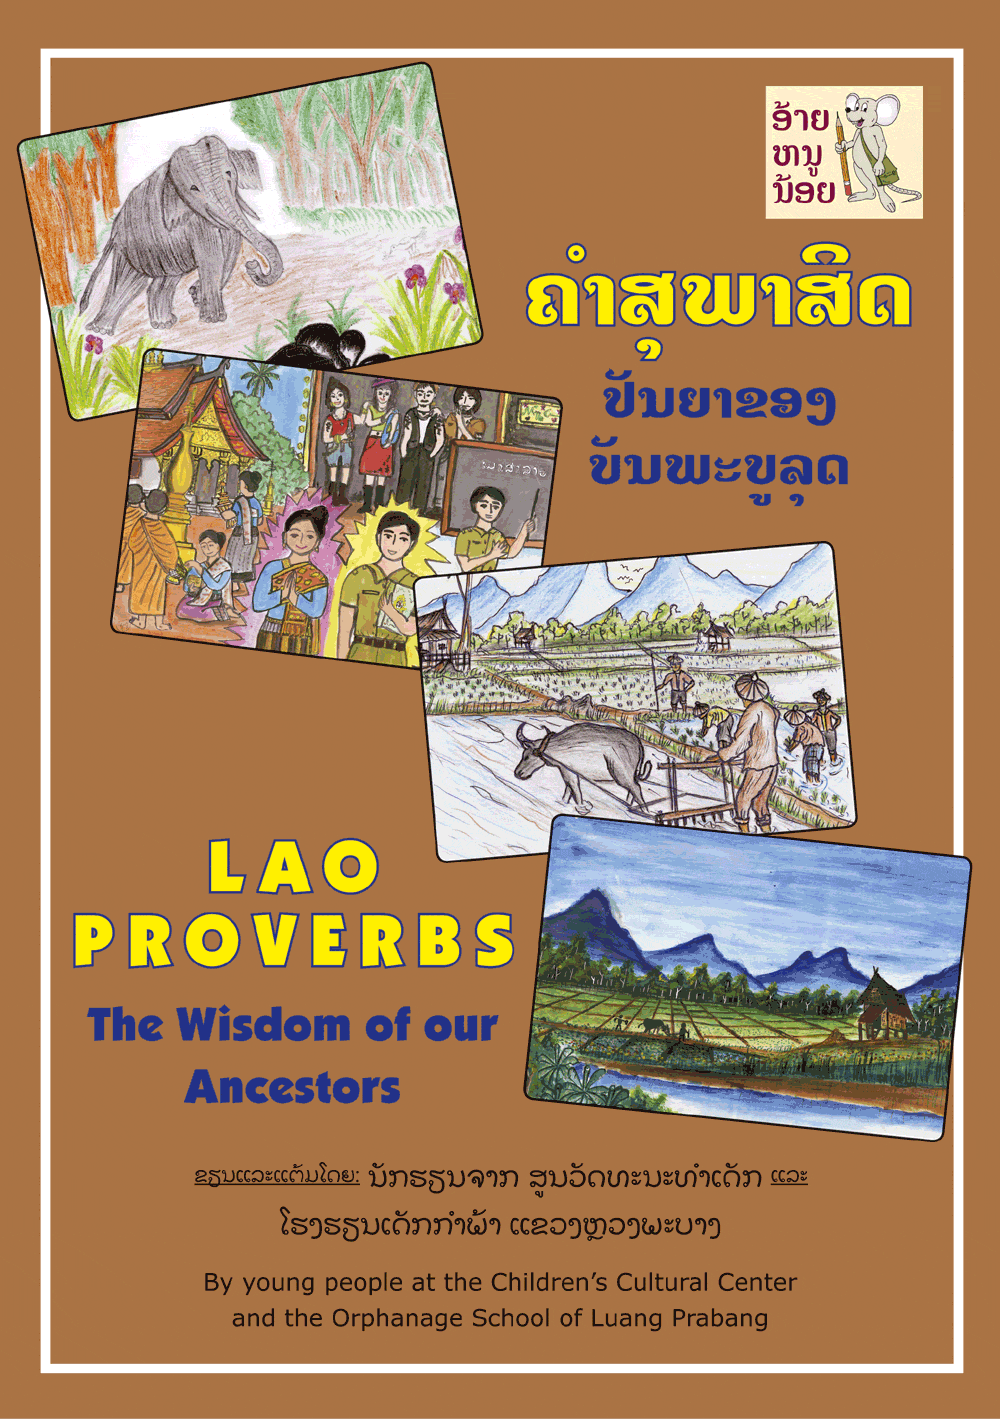 Proverbs of Laos large book cover, published in Lao and English